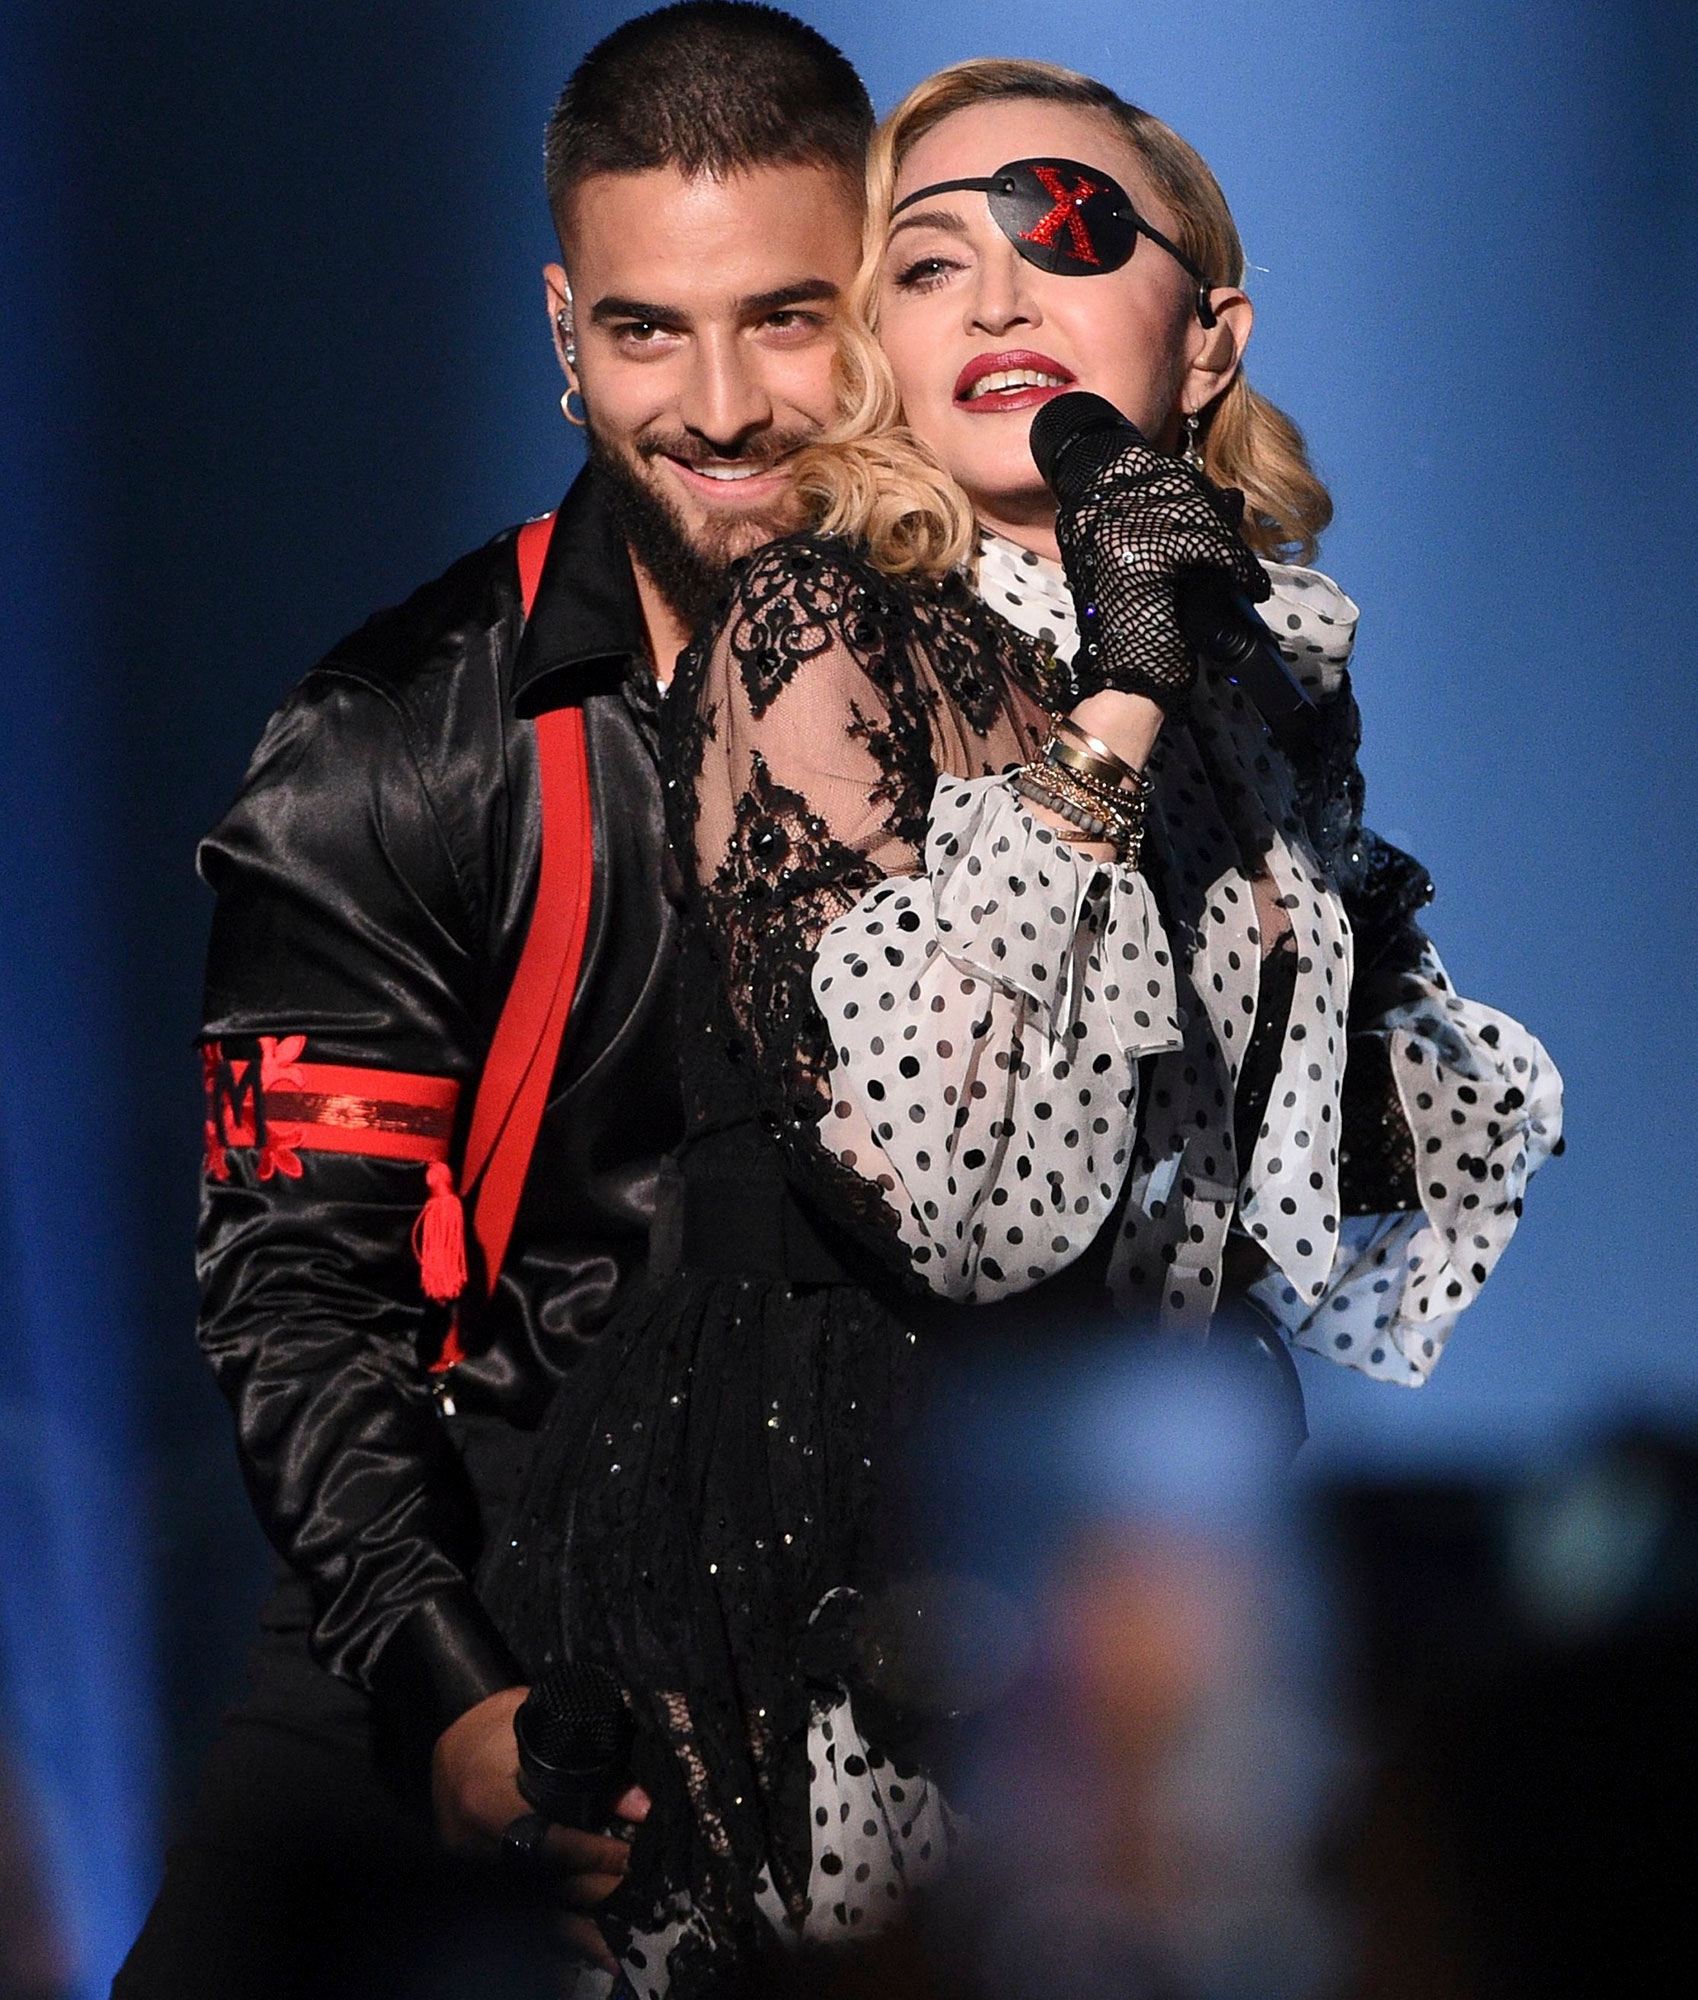 20190502-pictures-madonna-bbma-performance-22.jpg